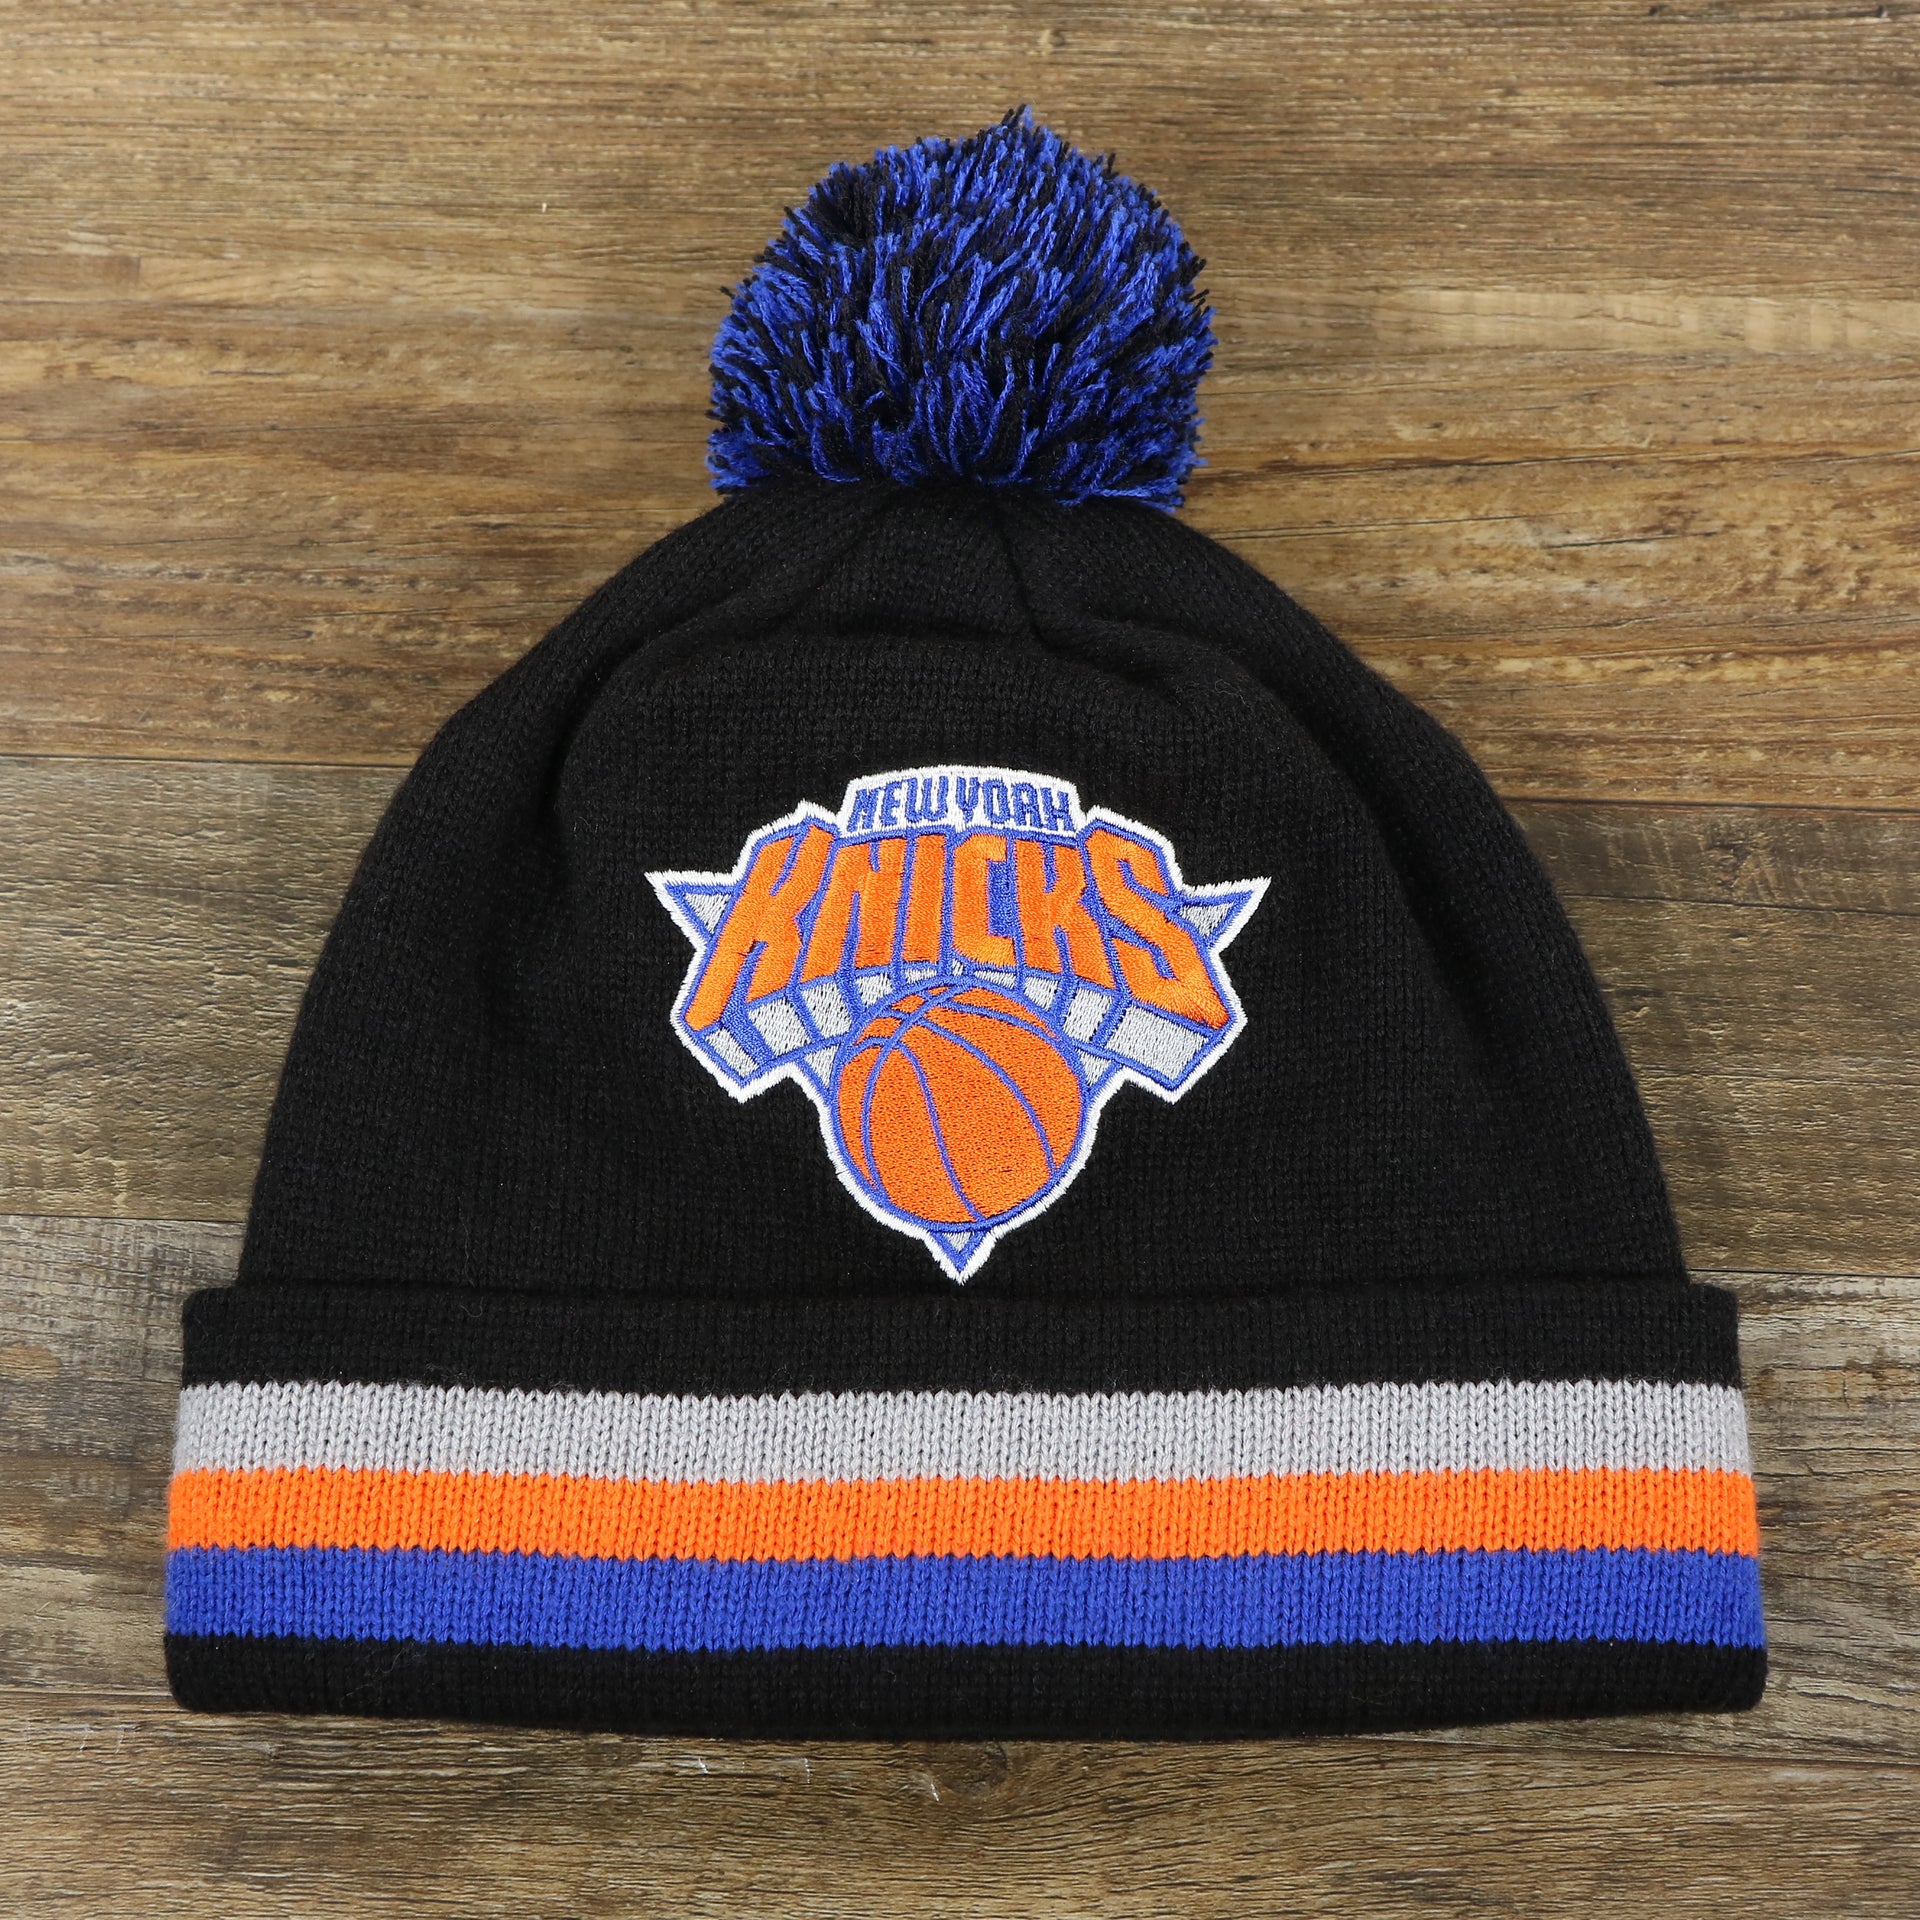 The front of the New York Knicks Striped Cuff Black Out Blackout Knit WInter Beanie With Multi Colored Pom Pom | Black Winter Beanie